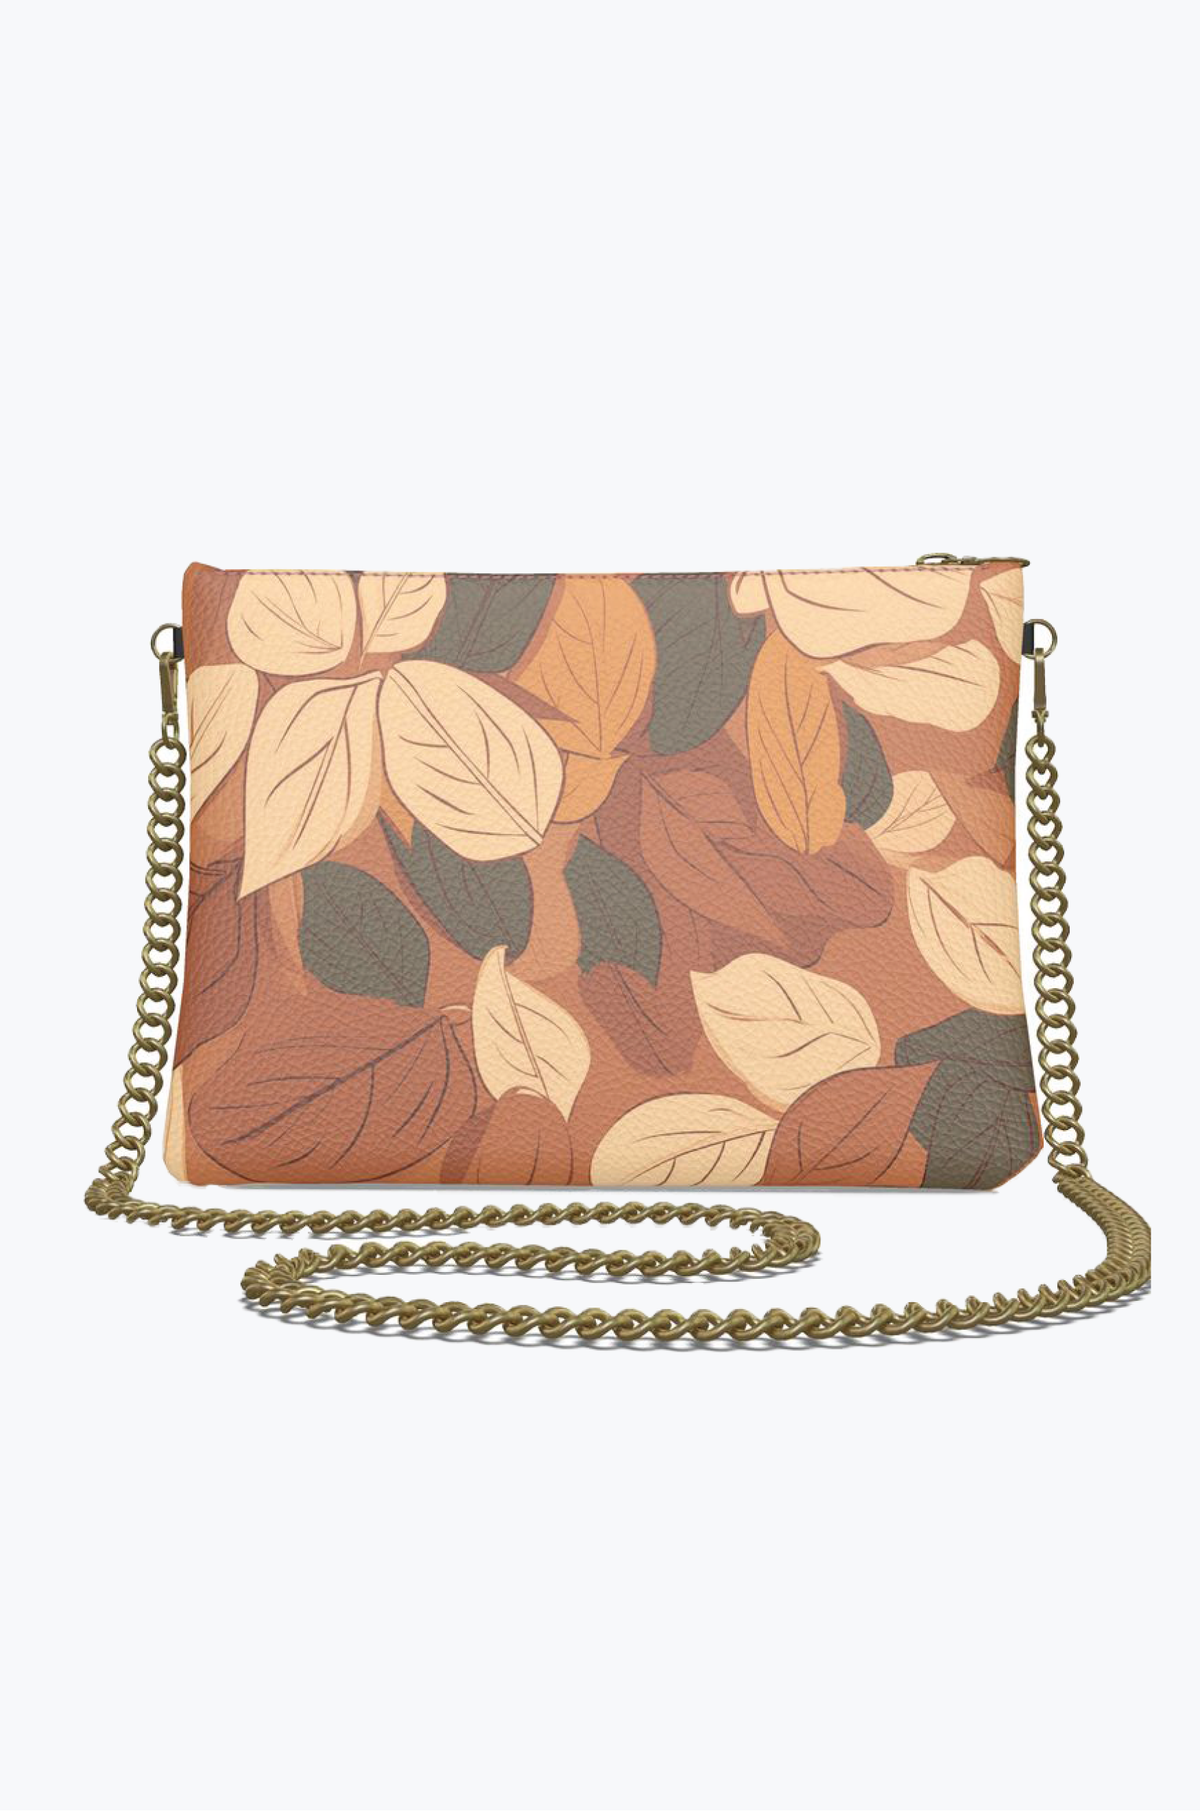 Rustling Leaf Foilage 100% Leather Crossbody Bag | Hypoallergenic - Allergy Friendly - Naturally Free